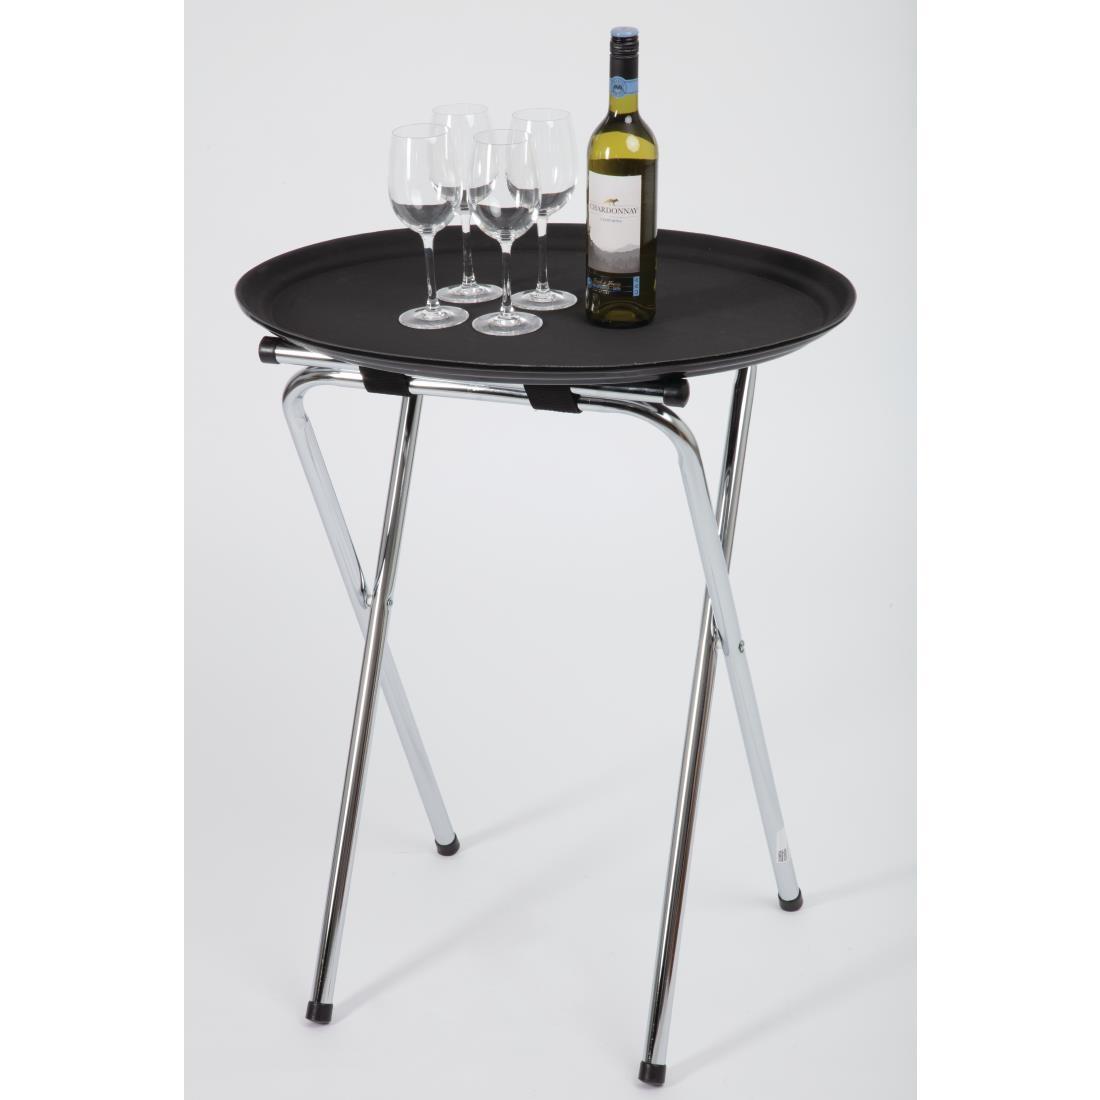 Olympia Chrome-Plated Steel Folding Tray Stand - C163  - 4